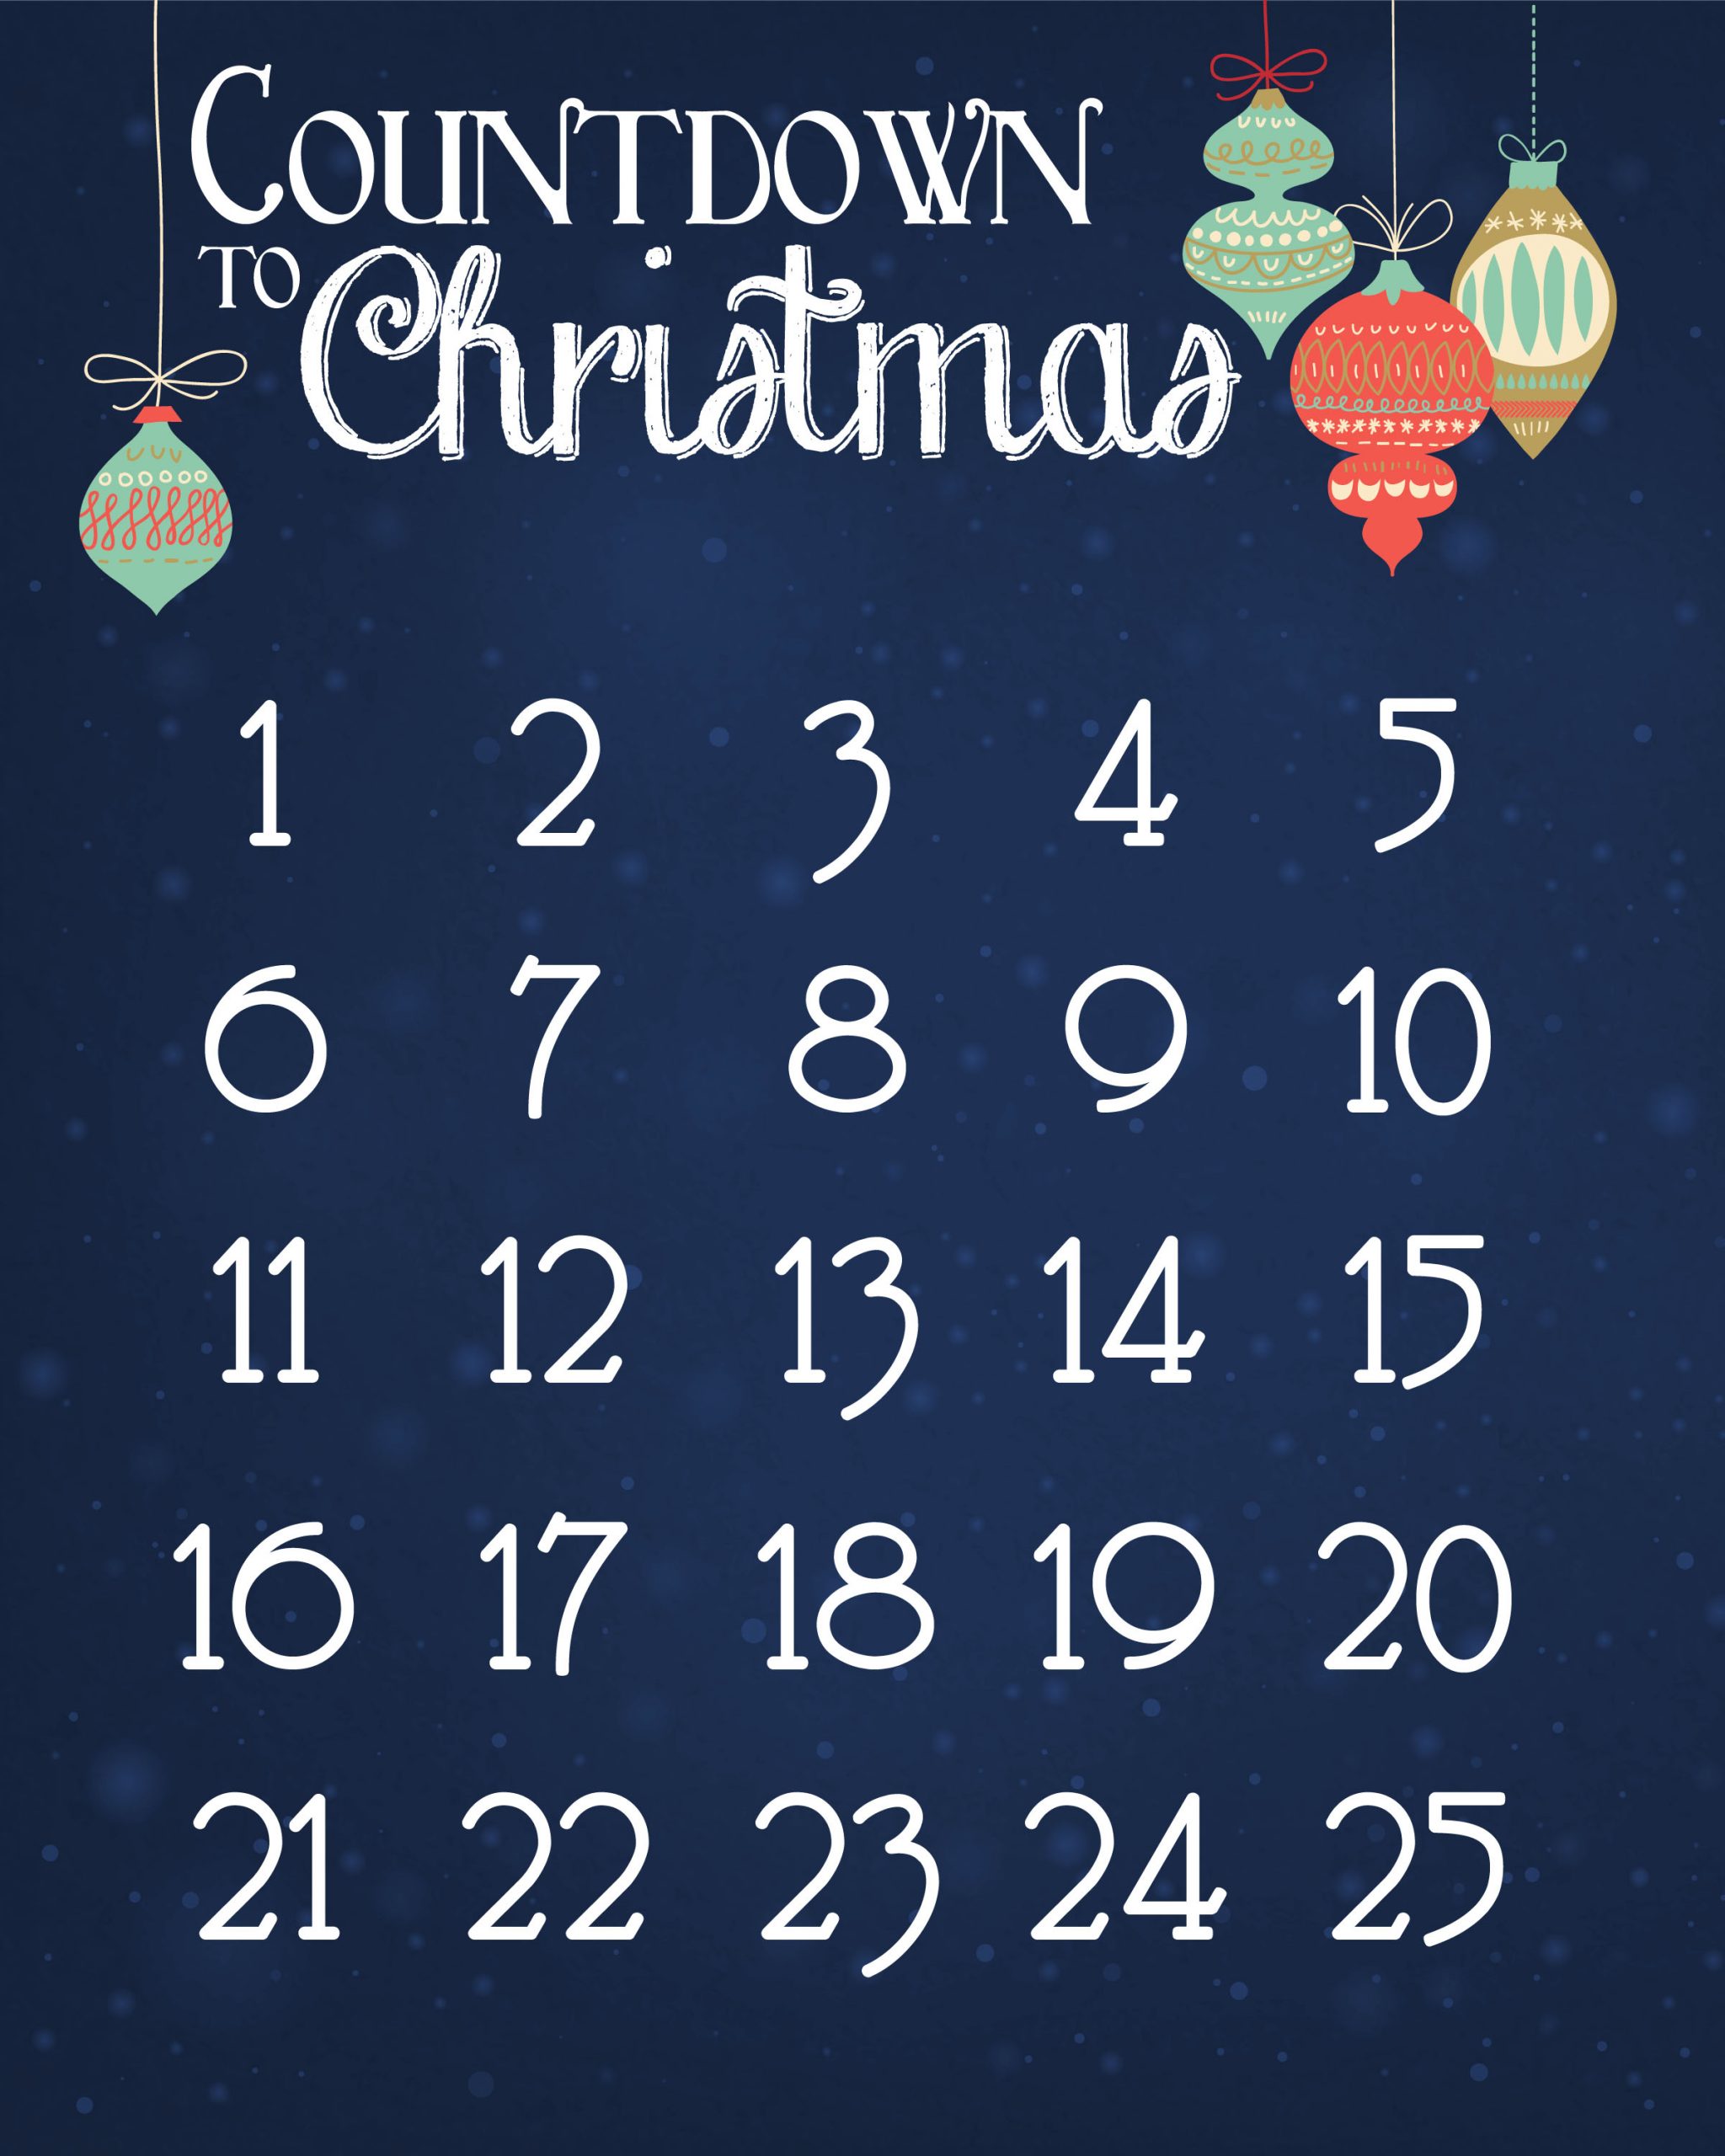 22 Awesome Christmas Countdown Calendars Kittybabylove 6